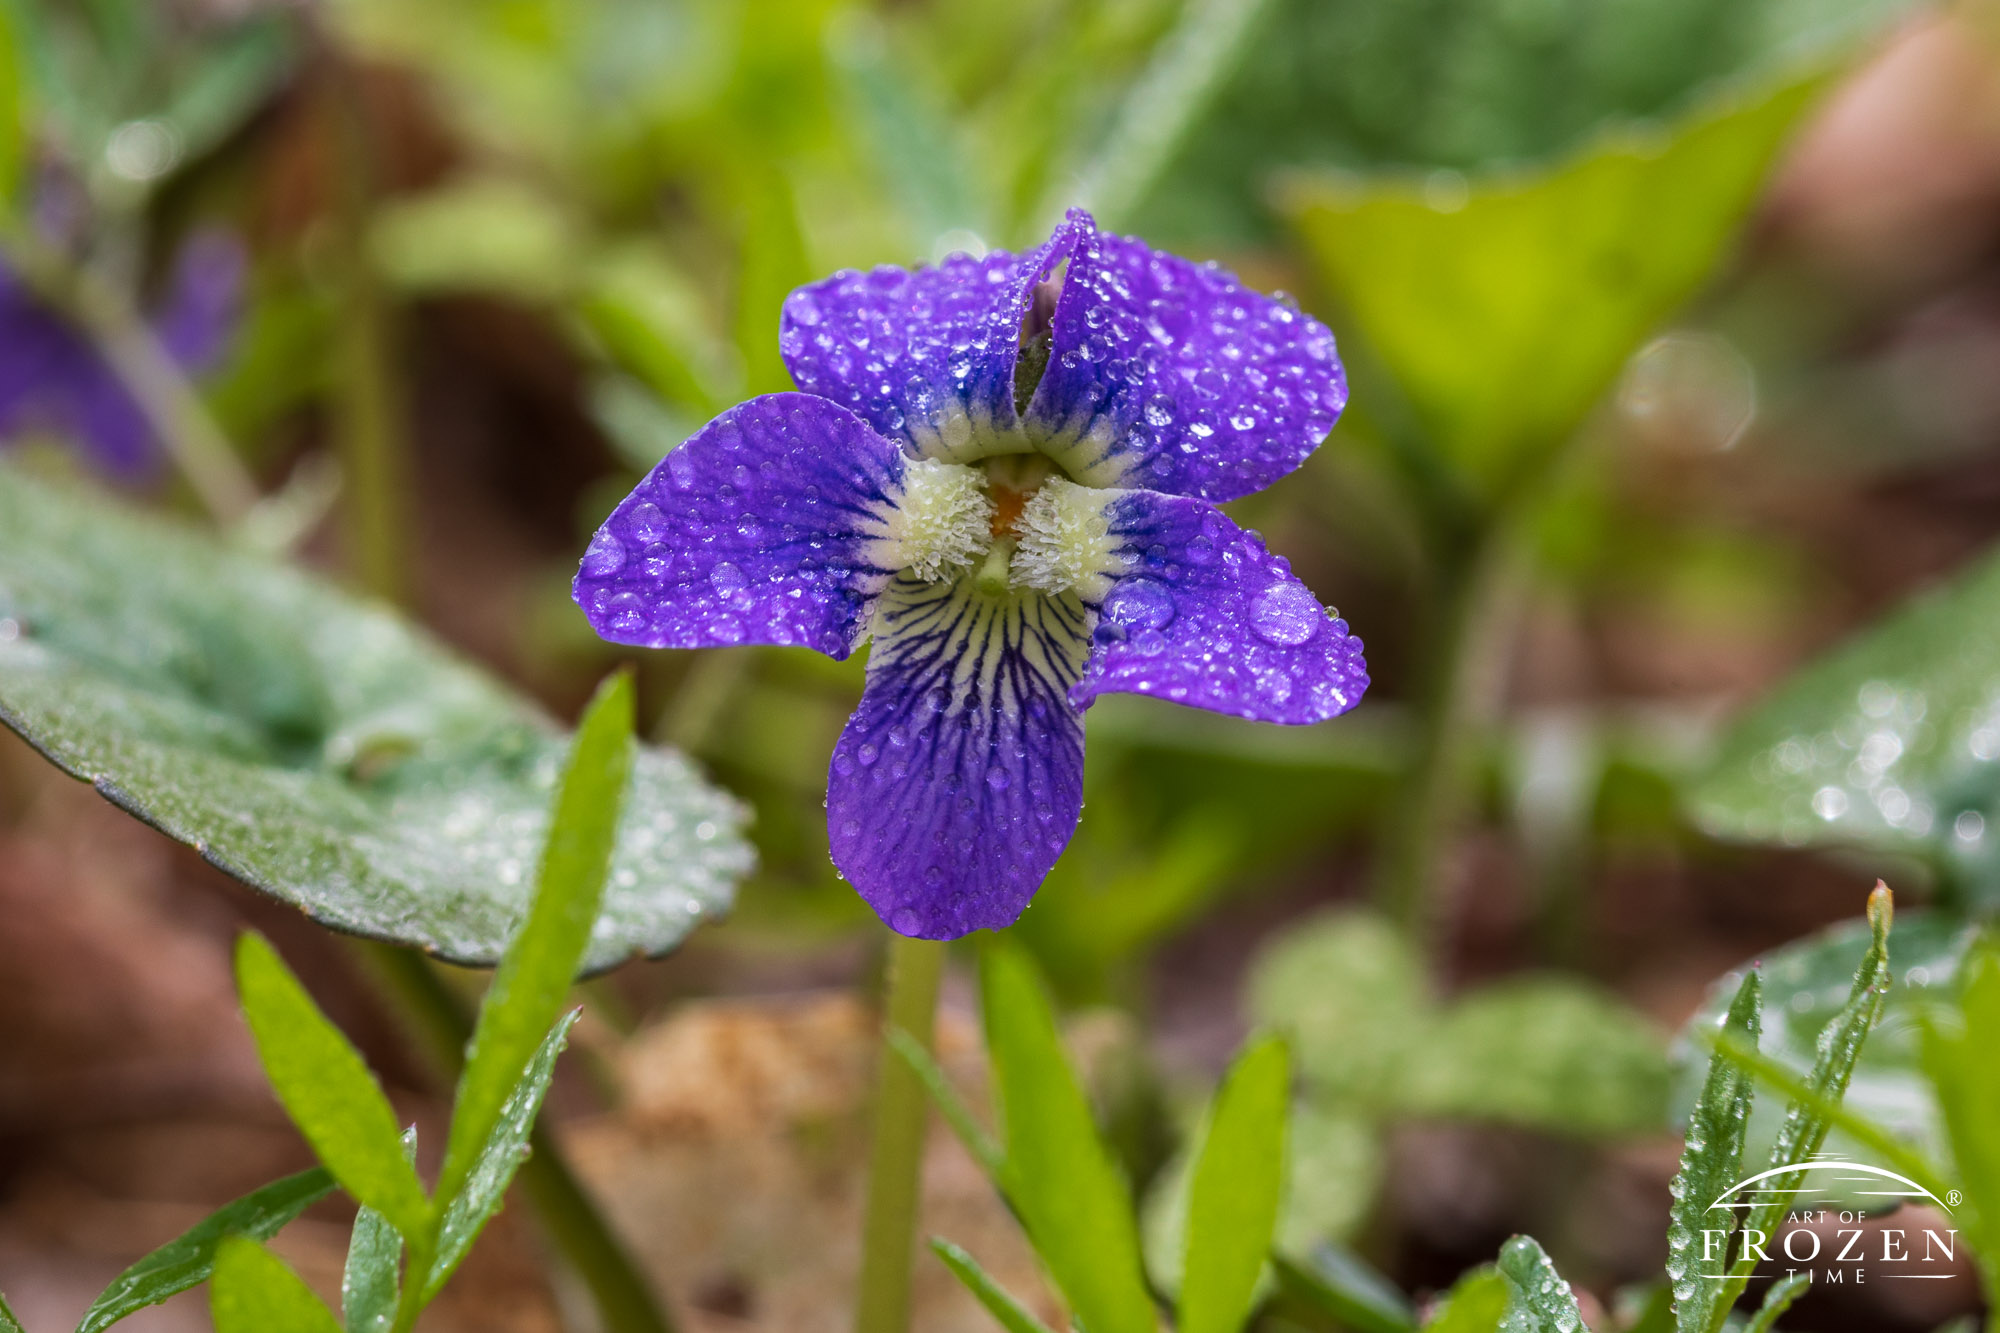 A close view of a Common Blue Violet with water drops clinging to its purple petals after a brief rain